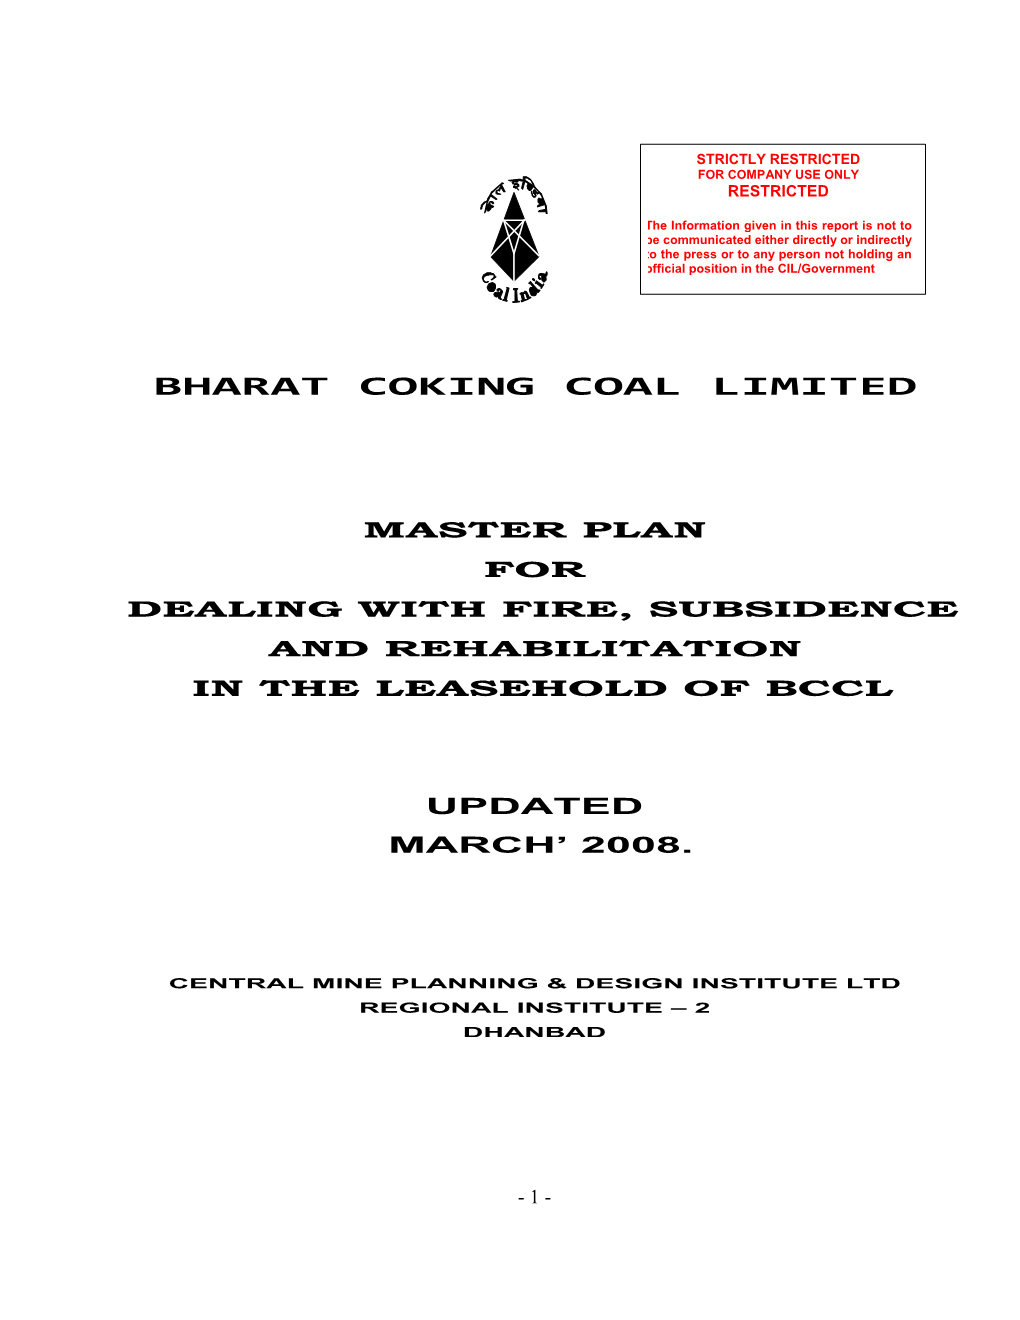 Master Plan for Dealing with Fire, Subsidence and Rehabilitation in the Leasehold of Bccl